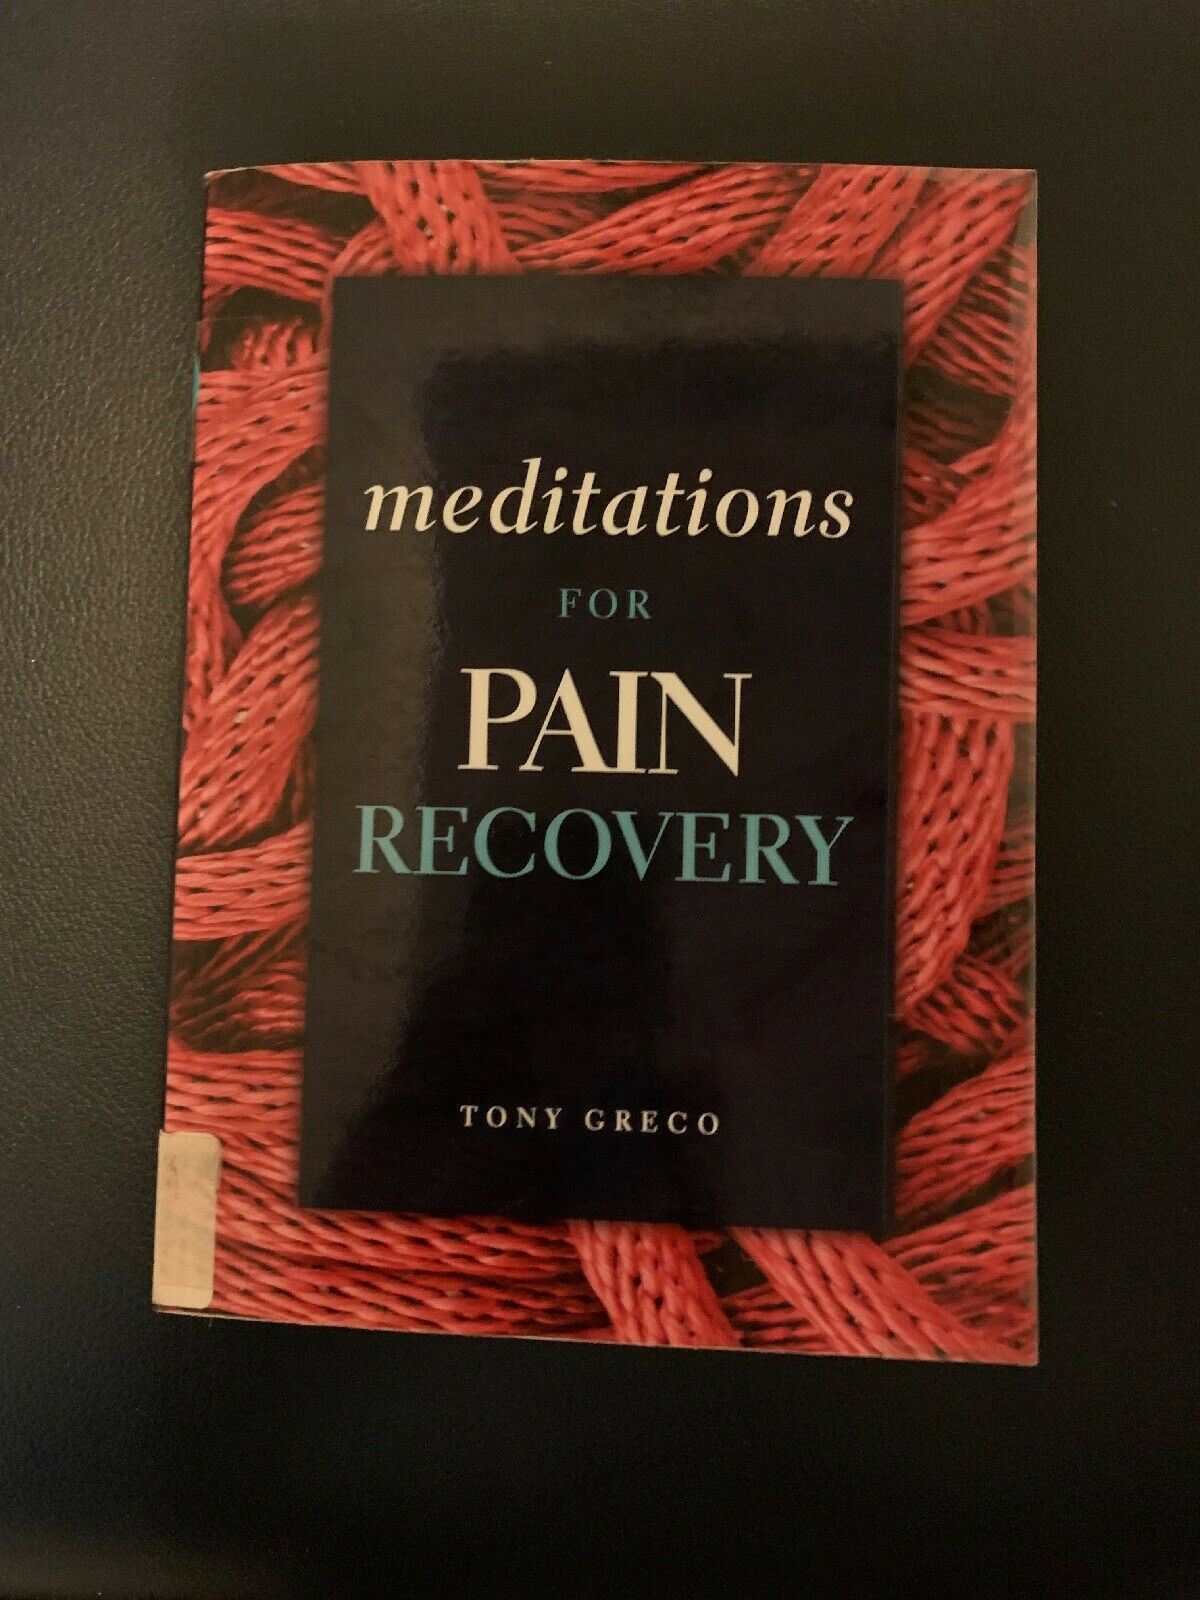 Meditations for Pain Recovery by Tony Greco (Paperback, 2010) Pain Relief Treat